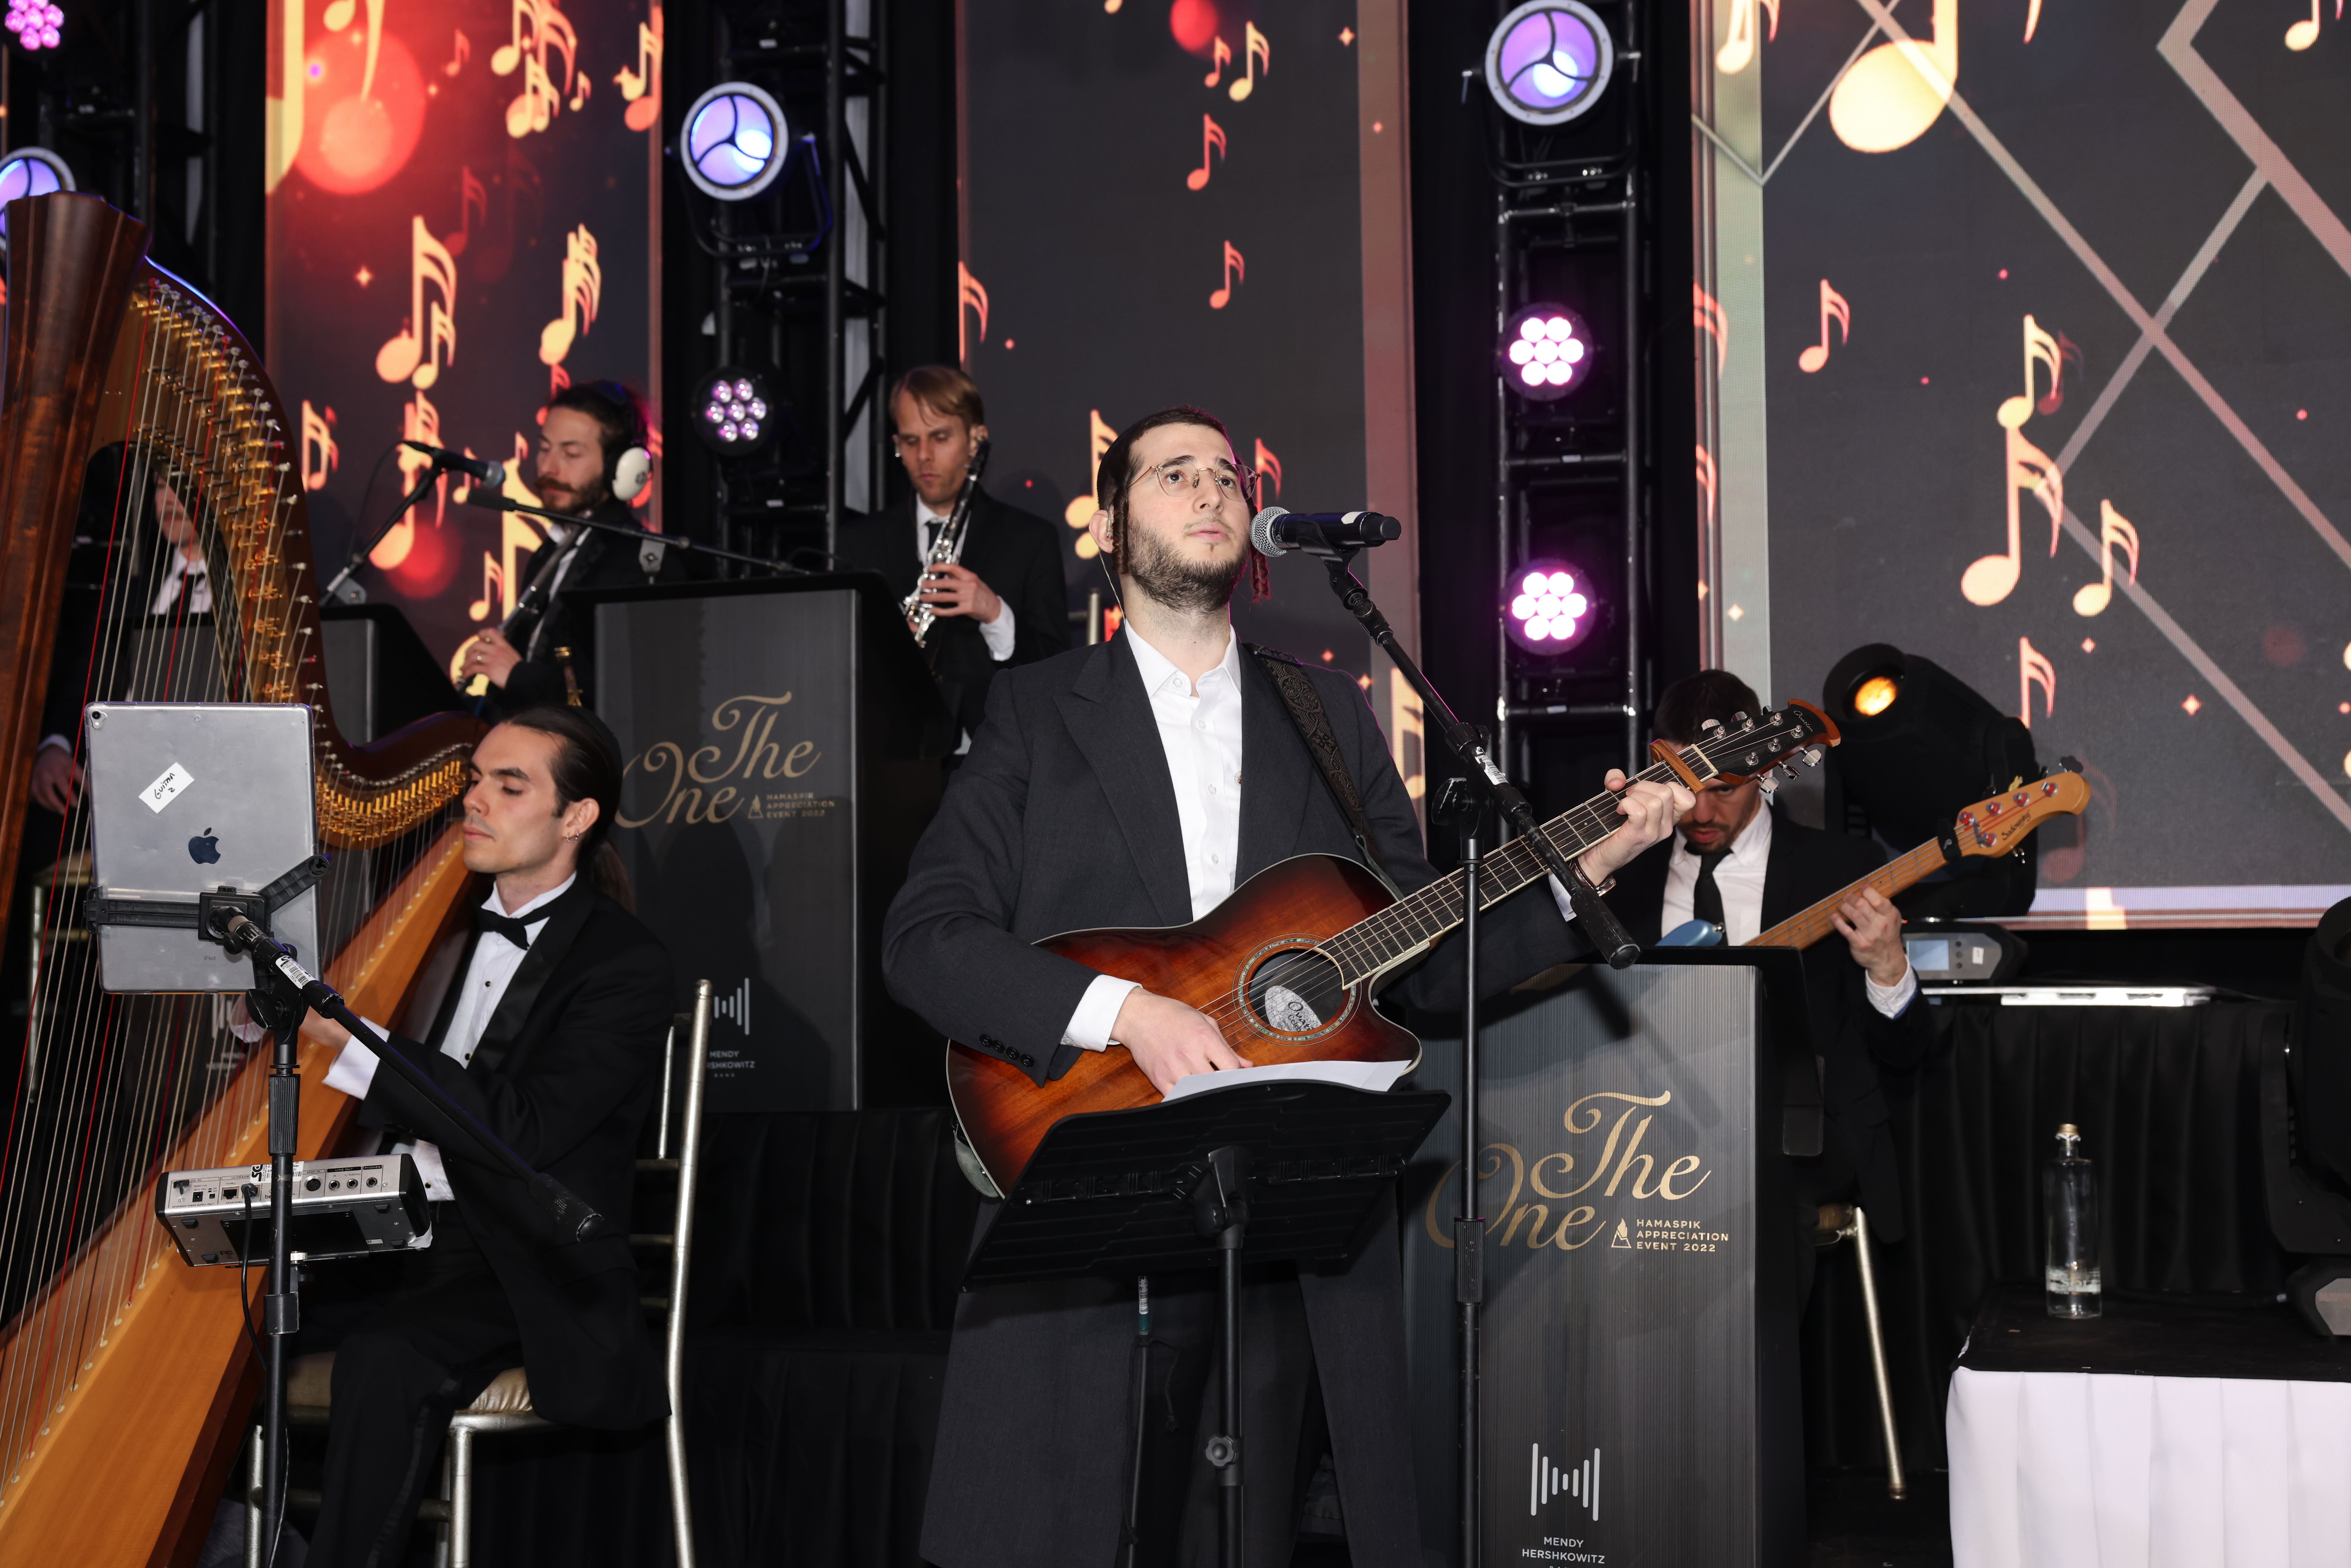 Dovy Meisels, Yedidim Choir and Mendy Hershkowitz band singing on stage at Hamaspik in Ateres Avrohom